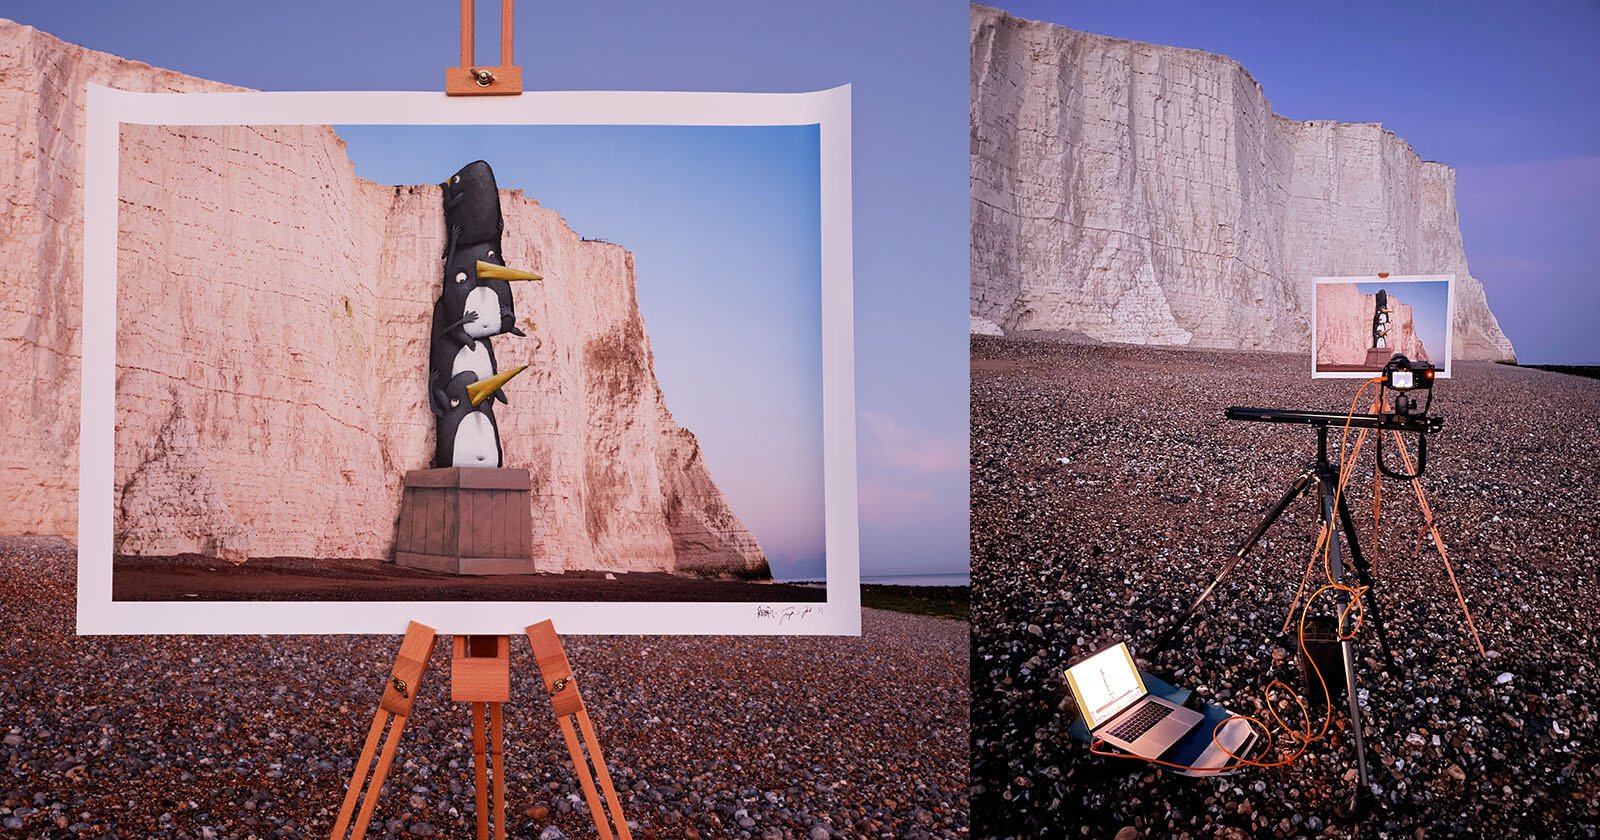 Photographer’s Cleverly Brings Street Art to ‘Impossible’ Places